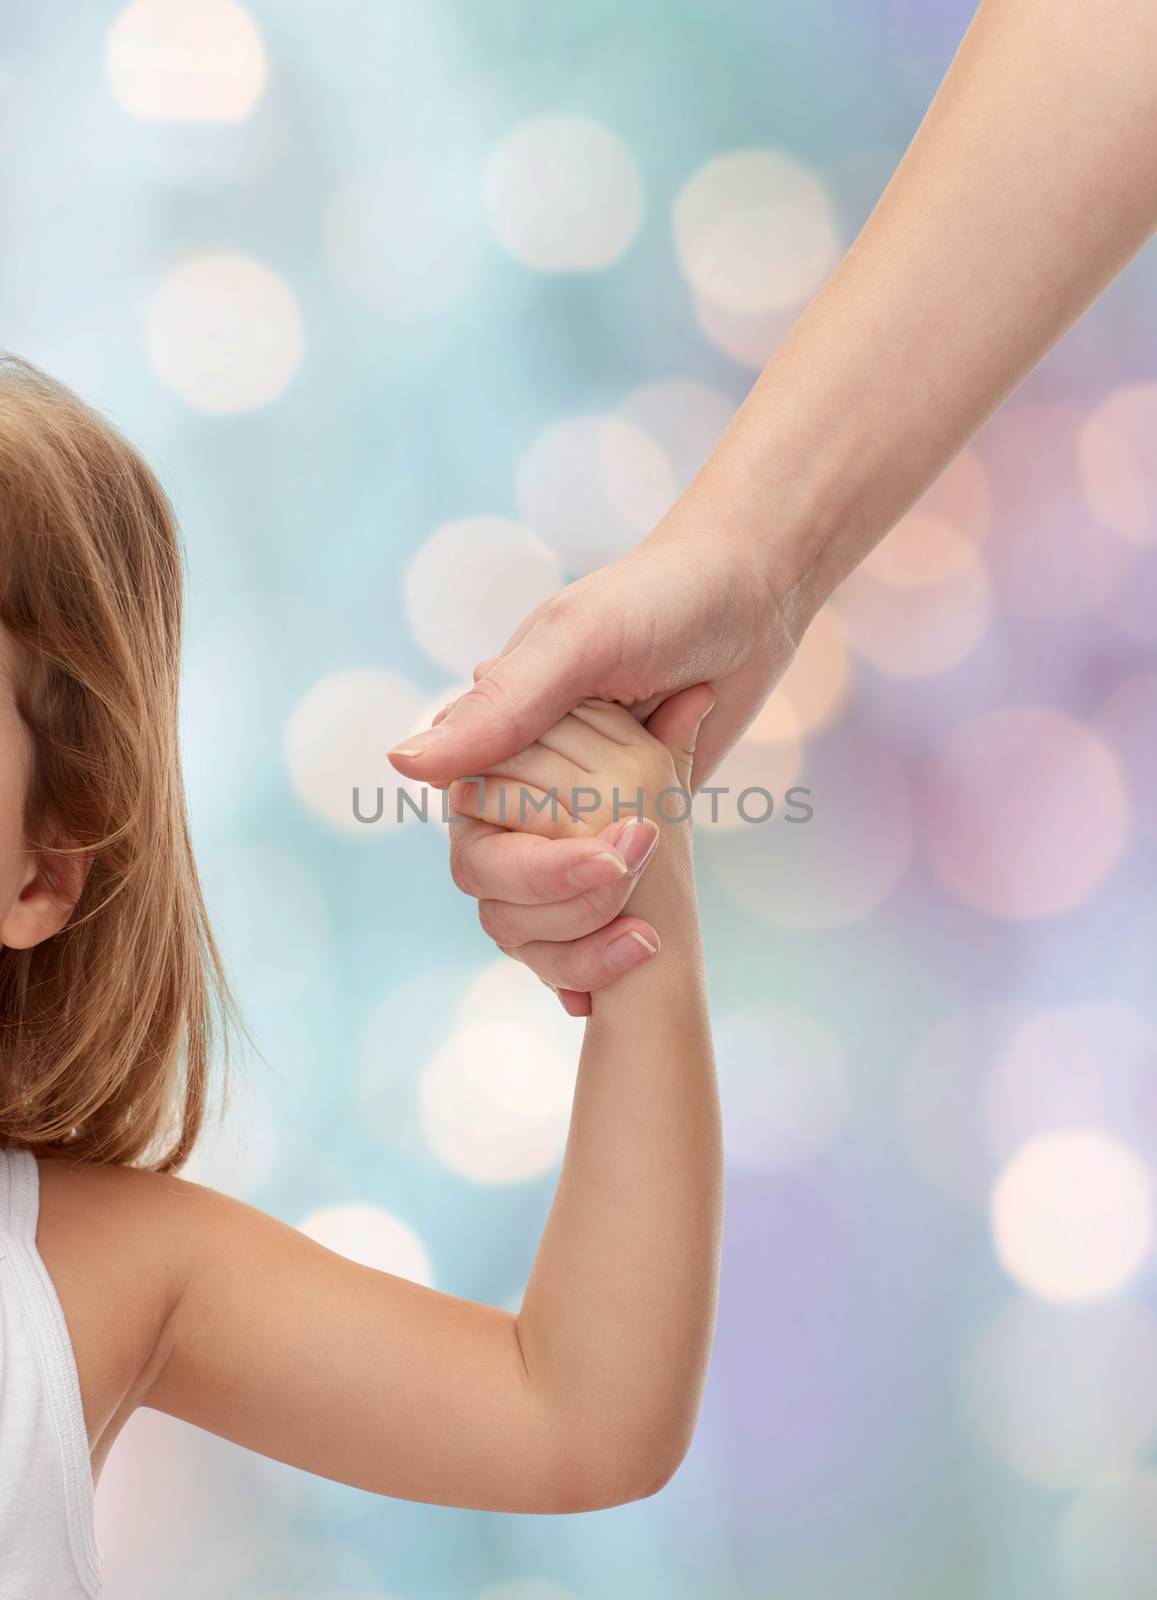 people, charity, family and adoption concept - close up of woman and little girl holding hands over holiday lights background